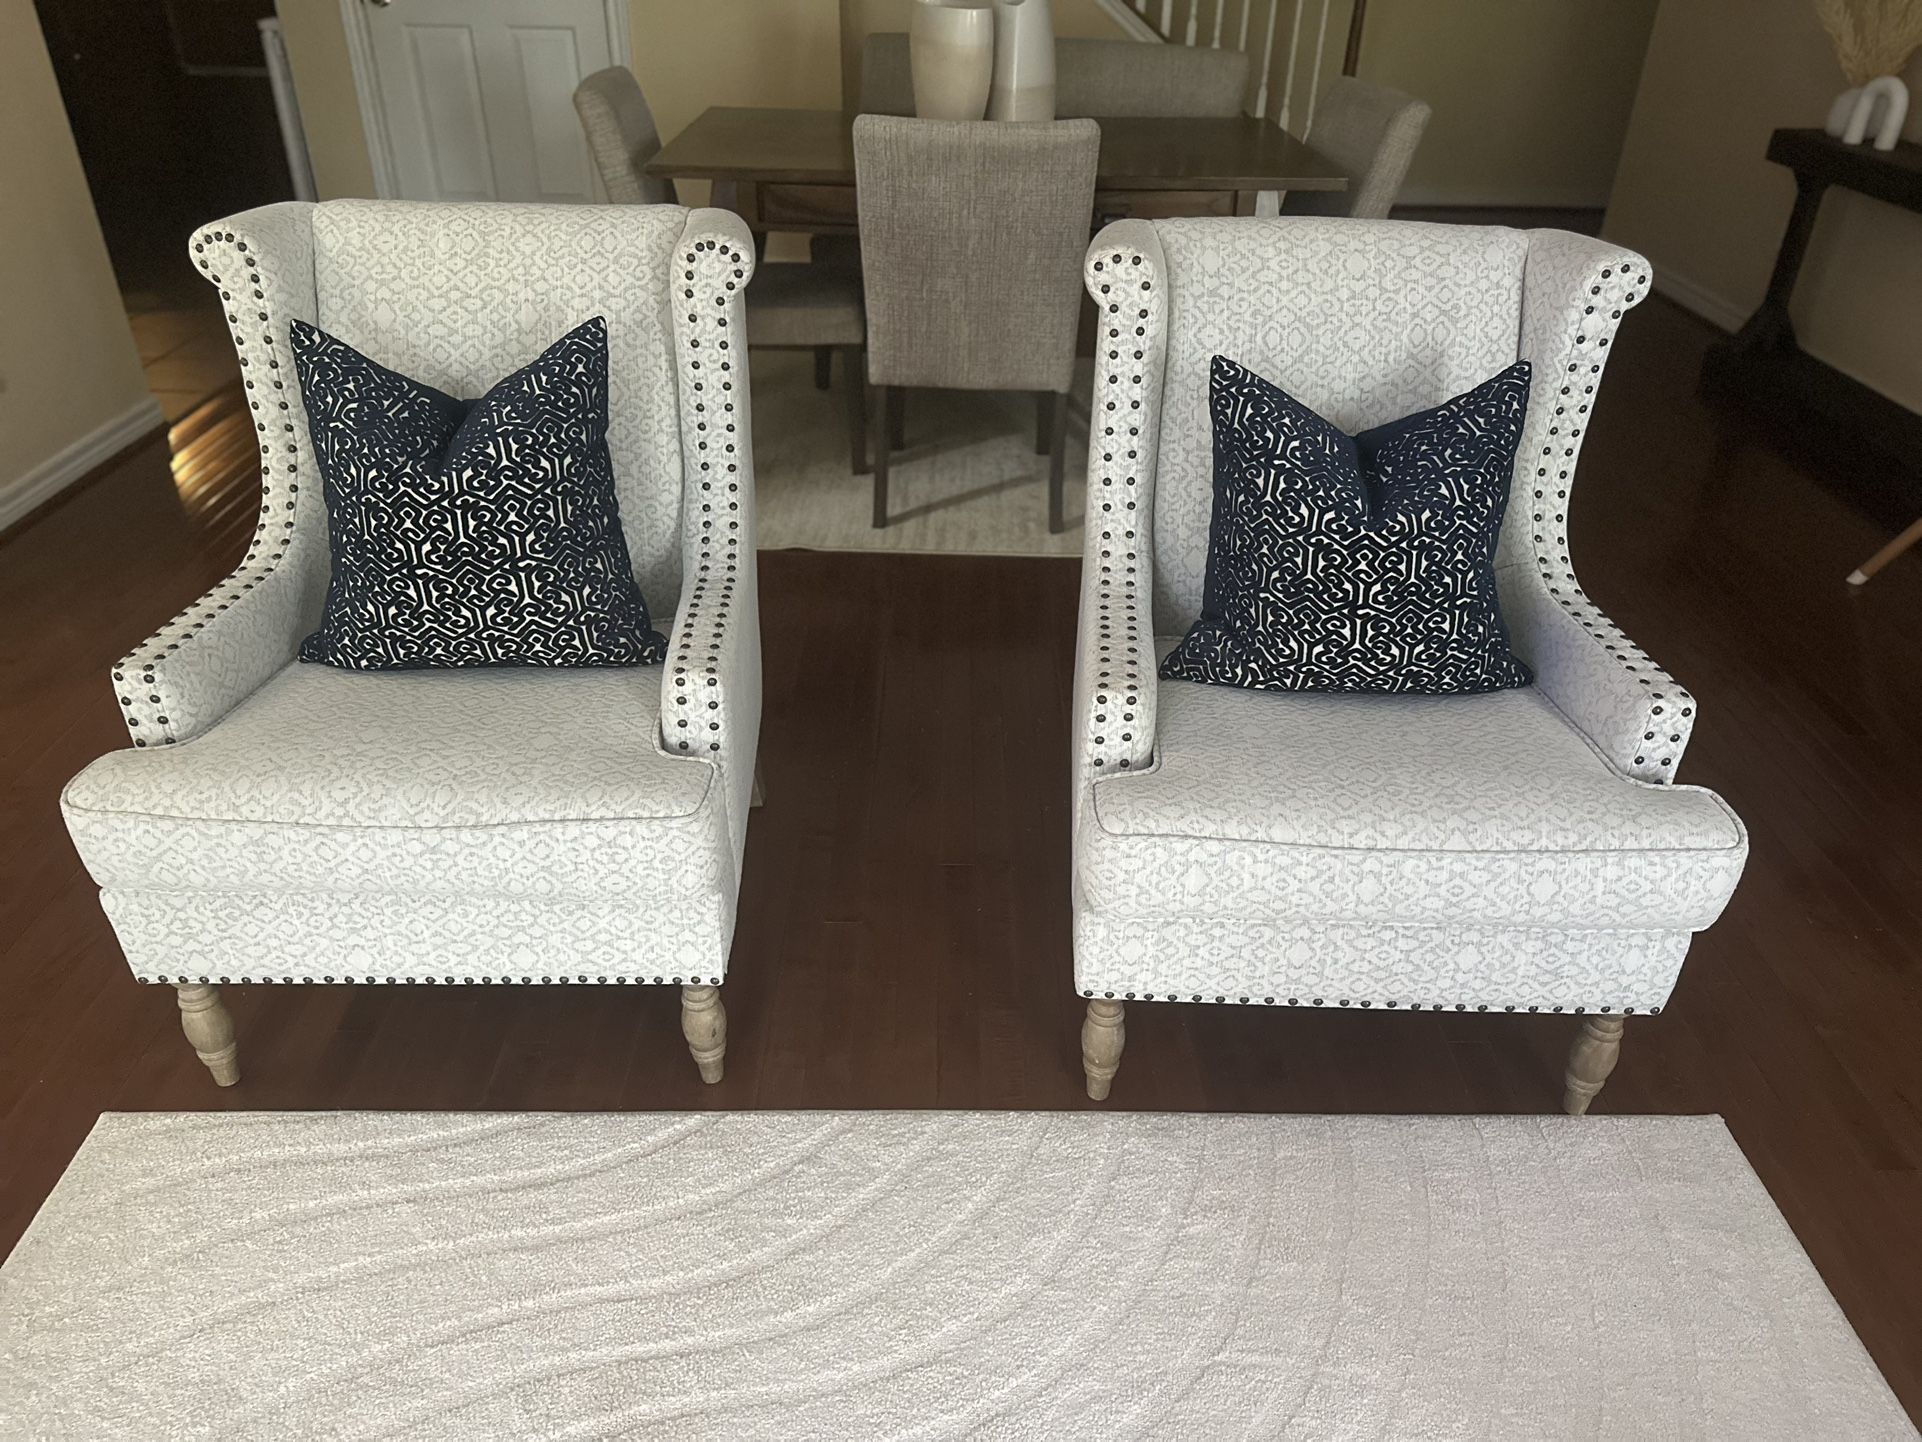 Beautiful Accent Chairs $600 For Both!